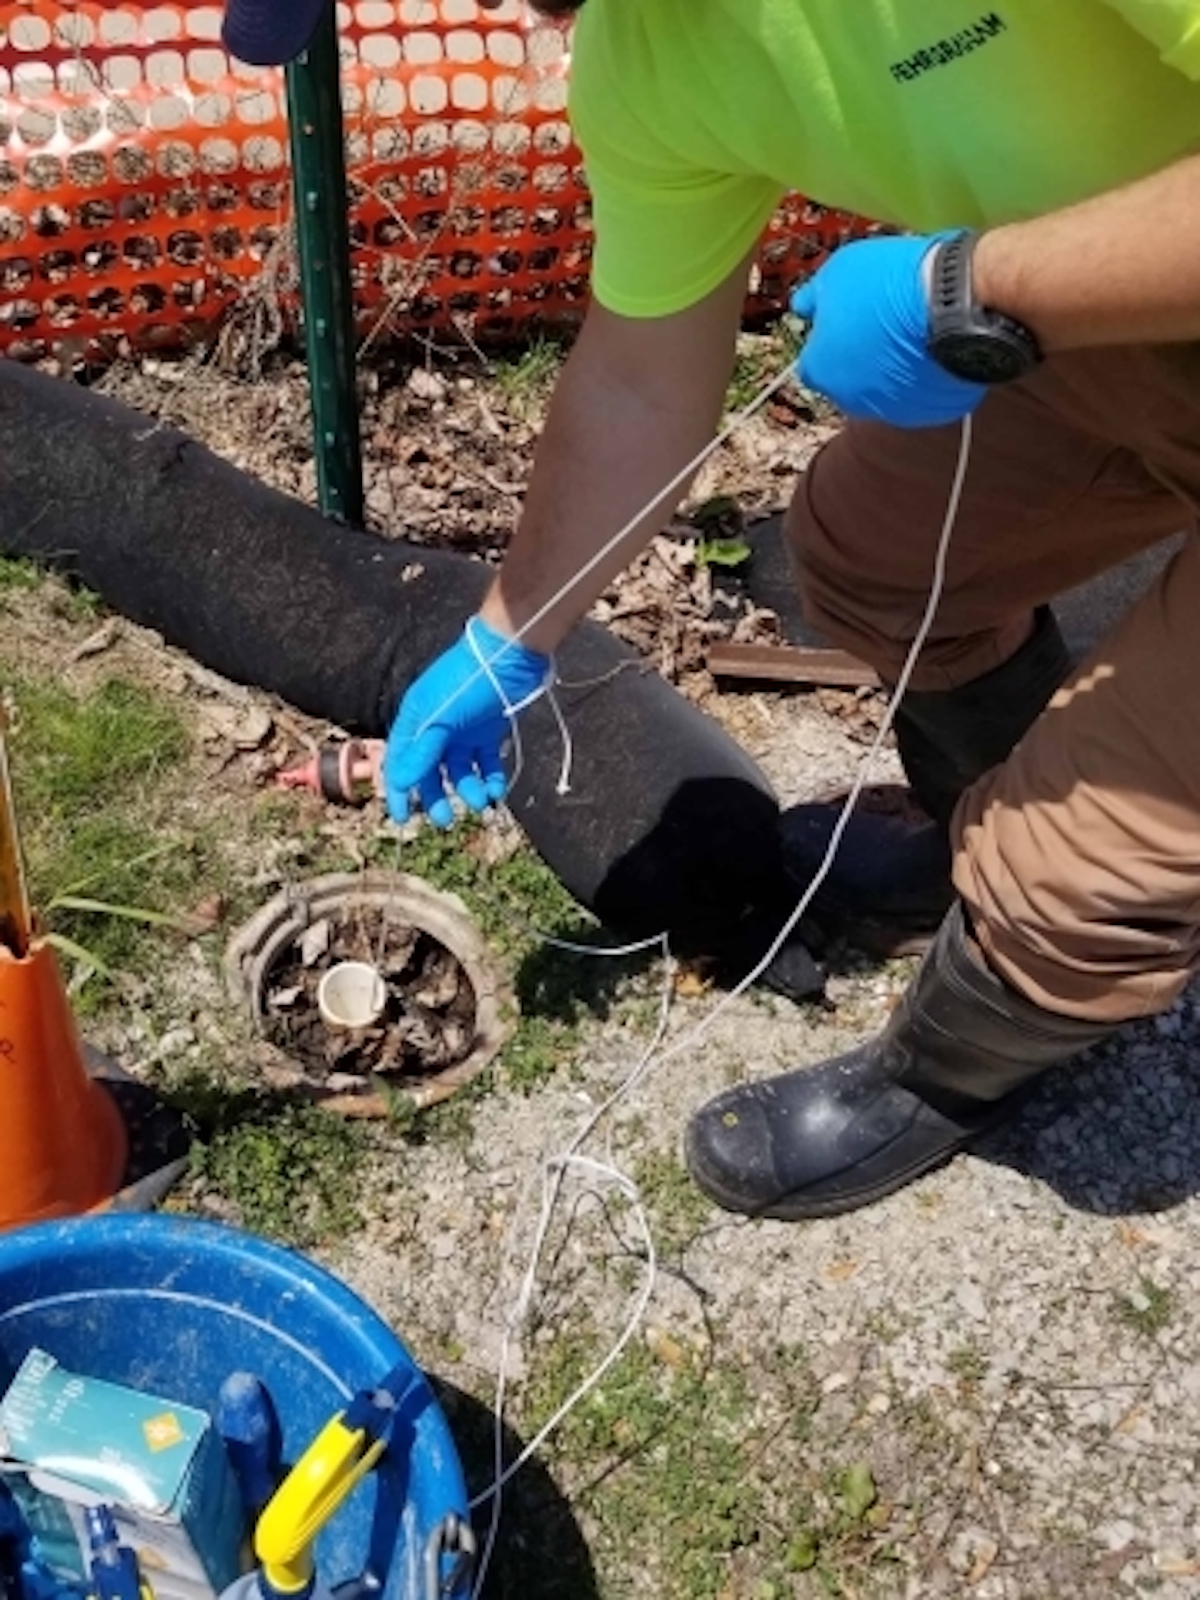 Sampling measures whether sites comply with Illinois PFAS standards.